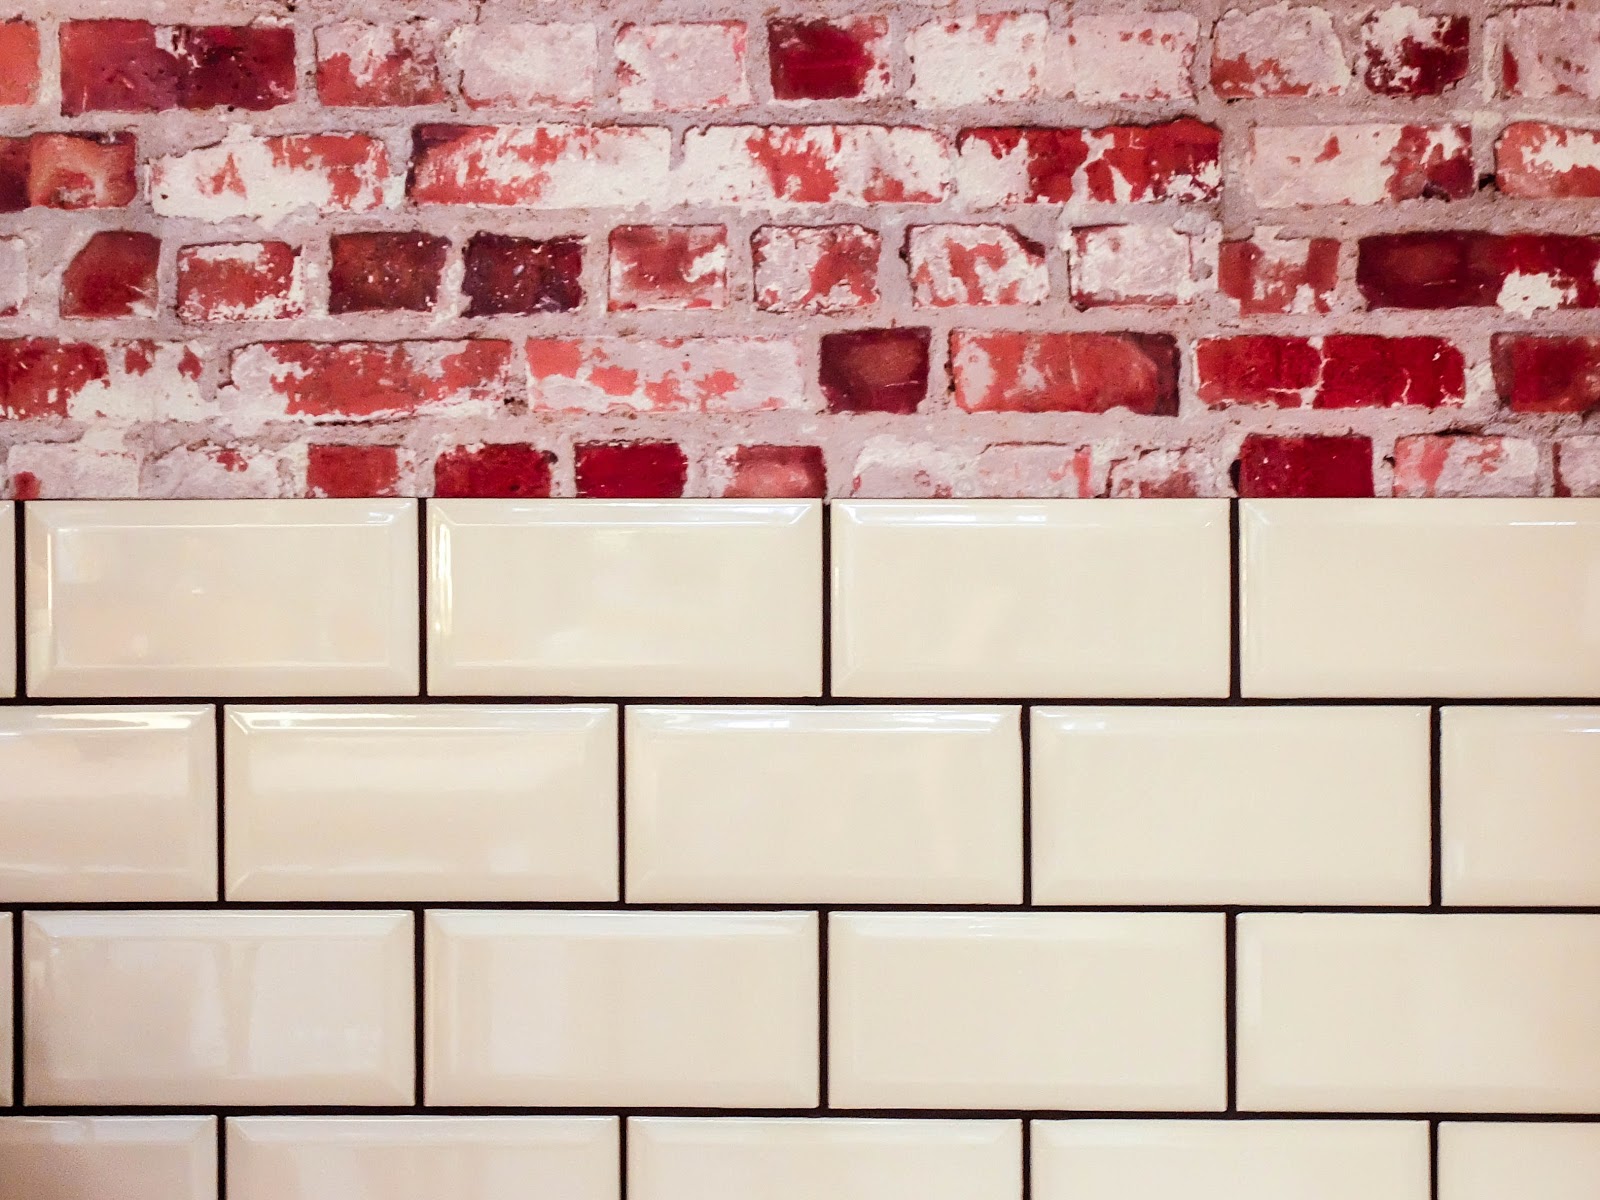 How to colour tile grout